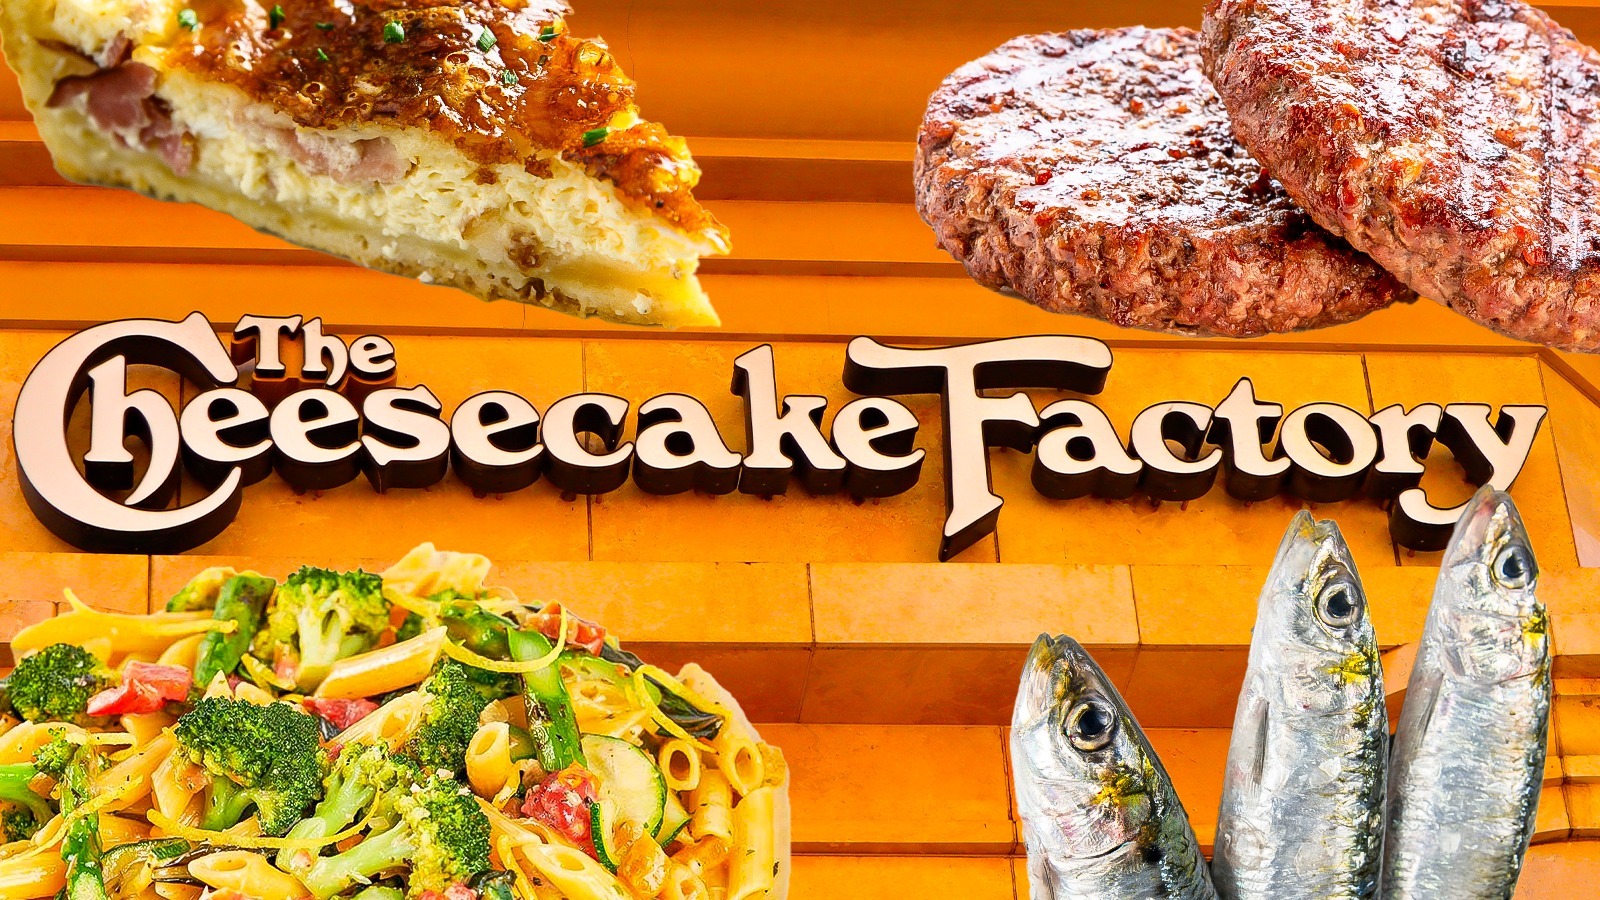 Cheesecake Factory $50 Gift Card US